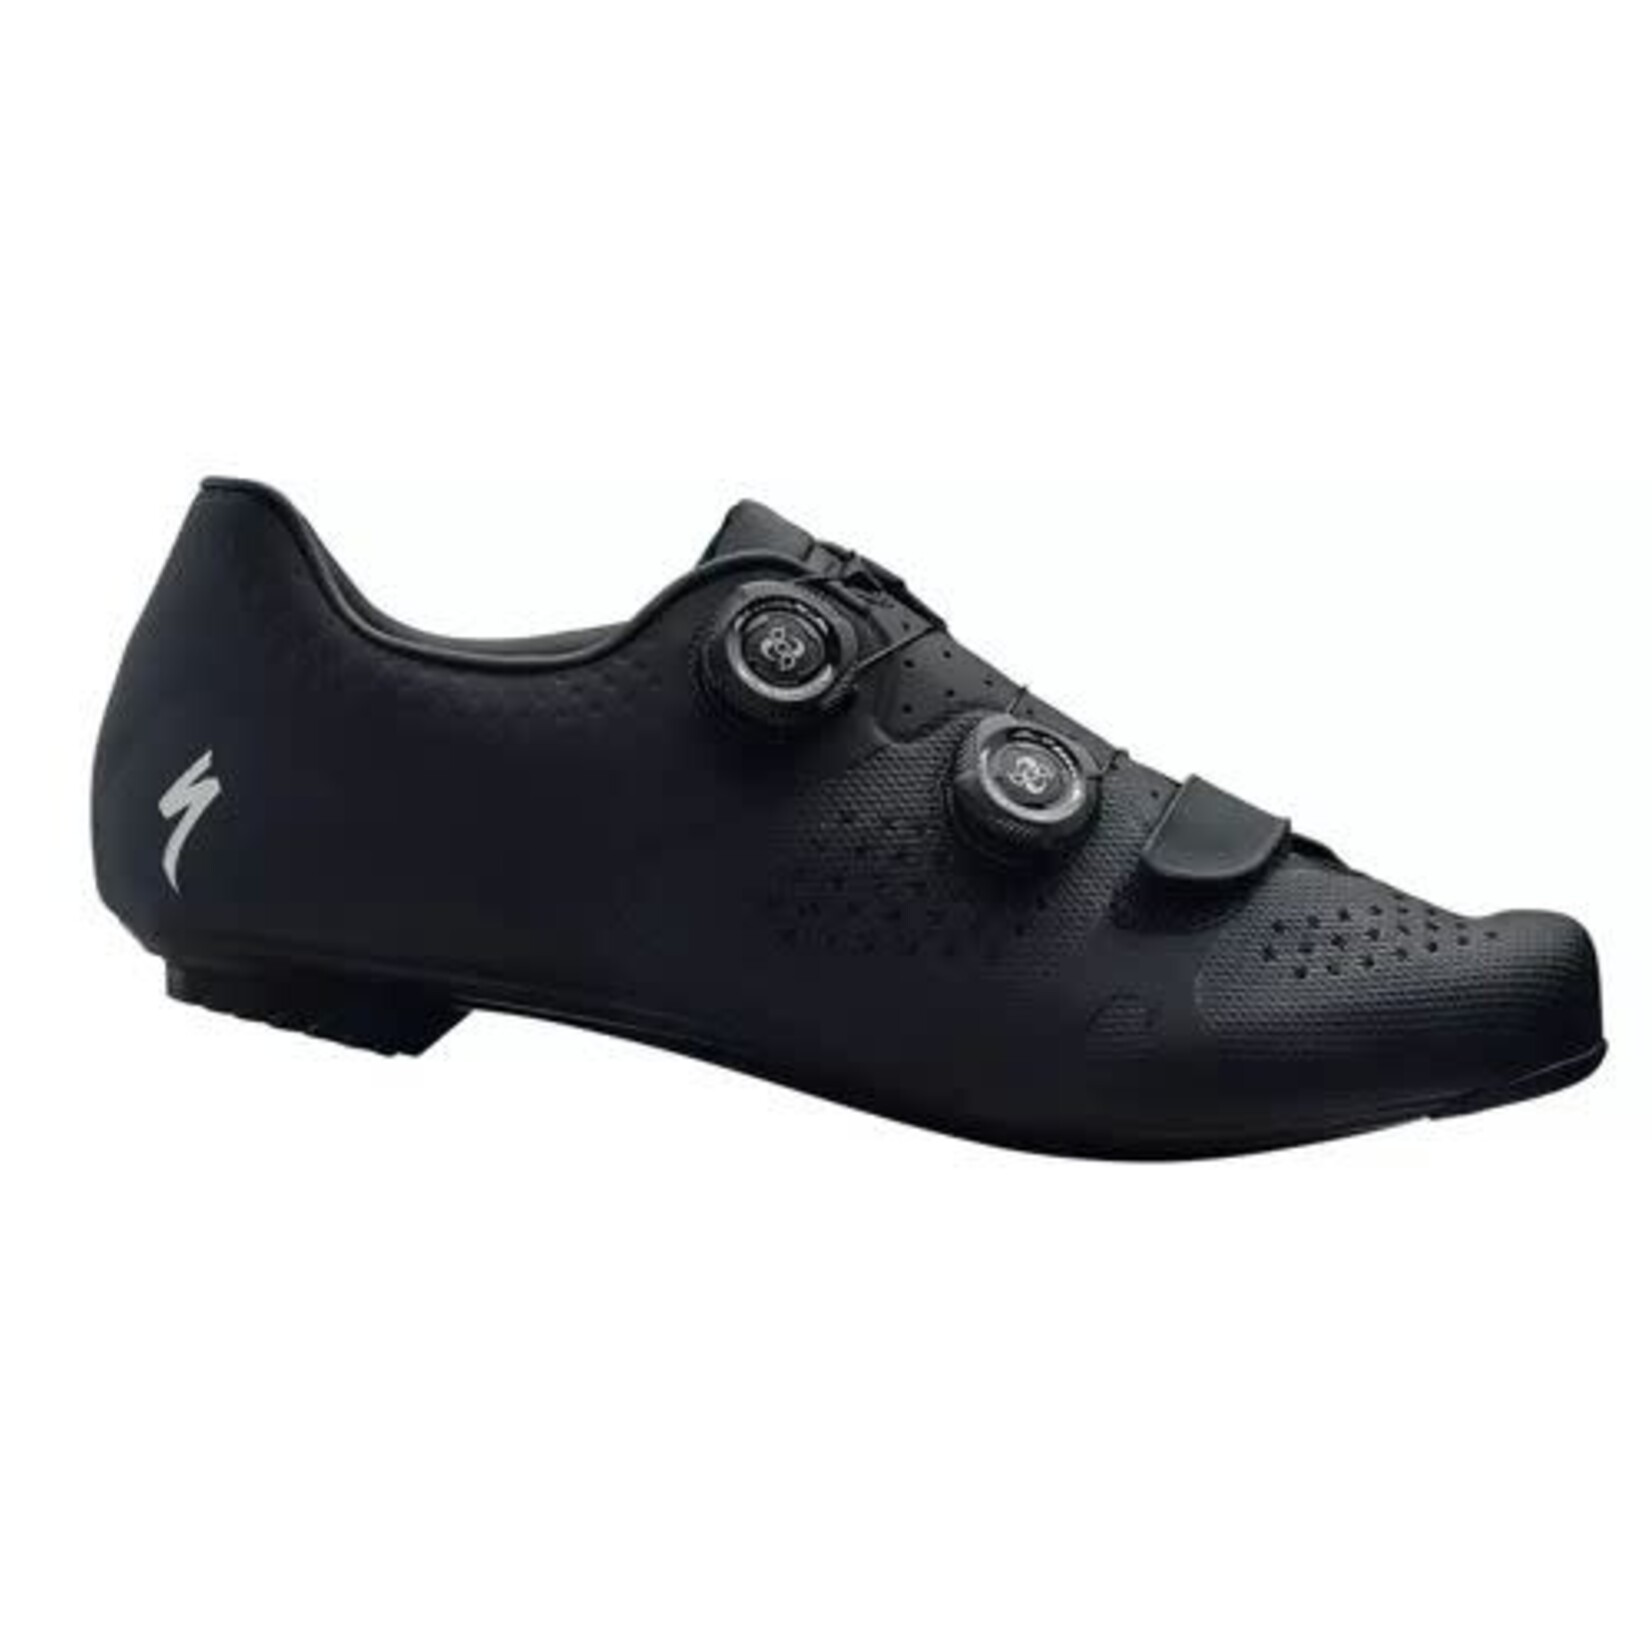 Specialized TORCH 3.0 RD SHOE BLK 47